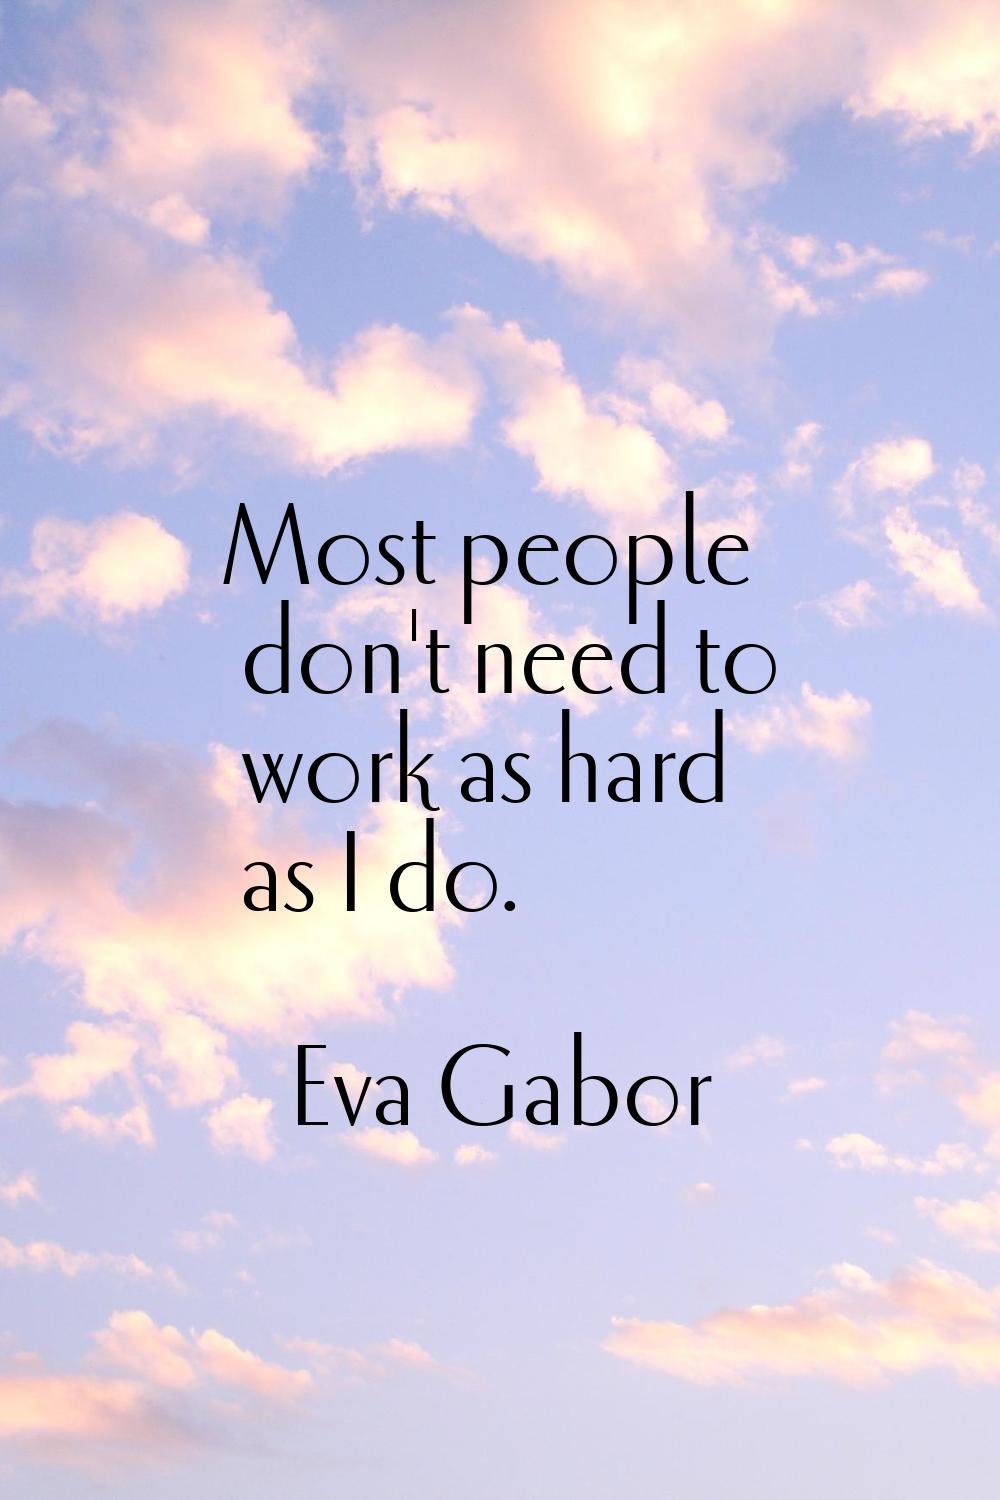 Most people don't need to work as hard as I do.